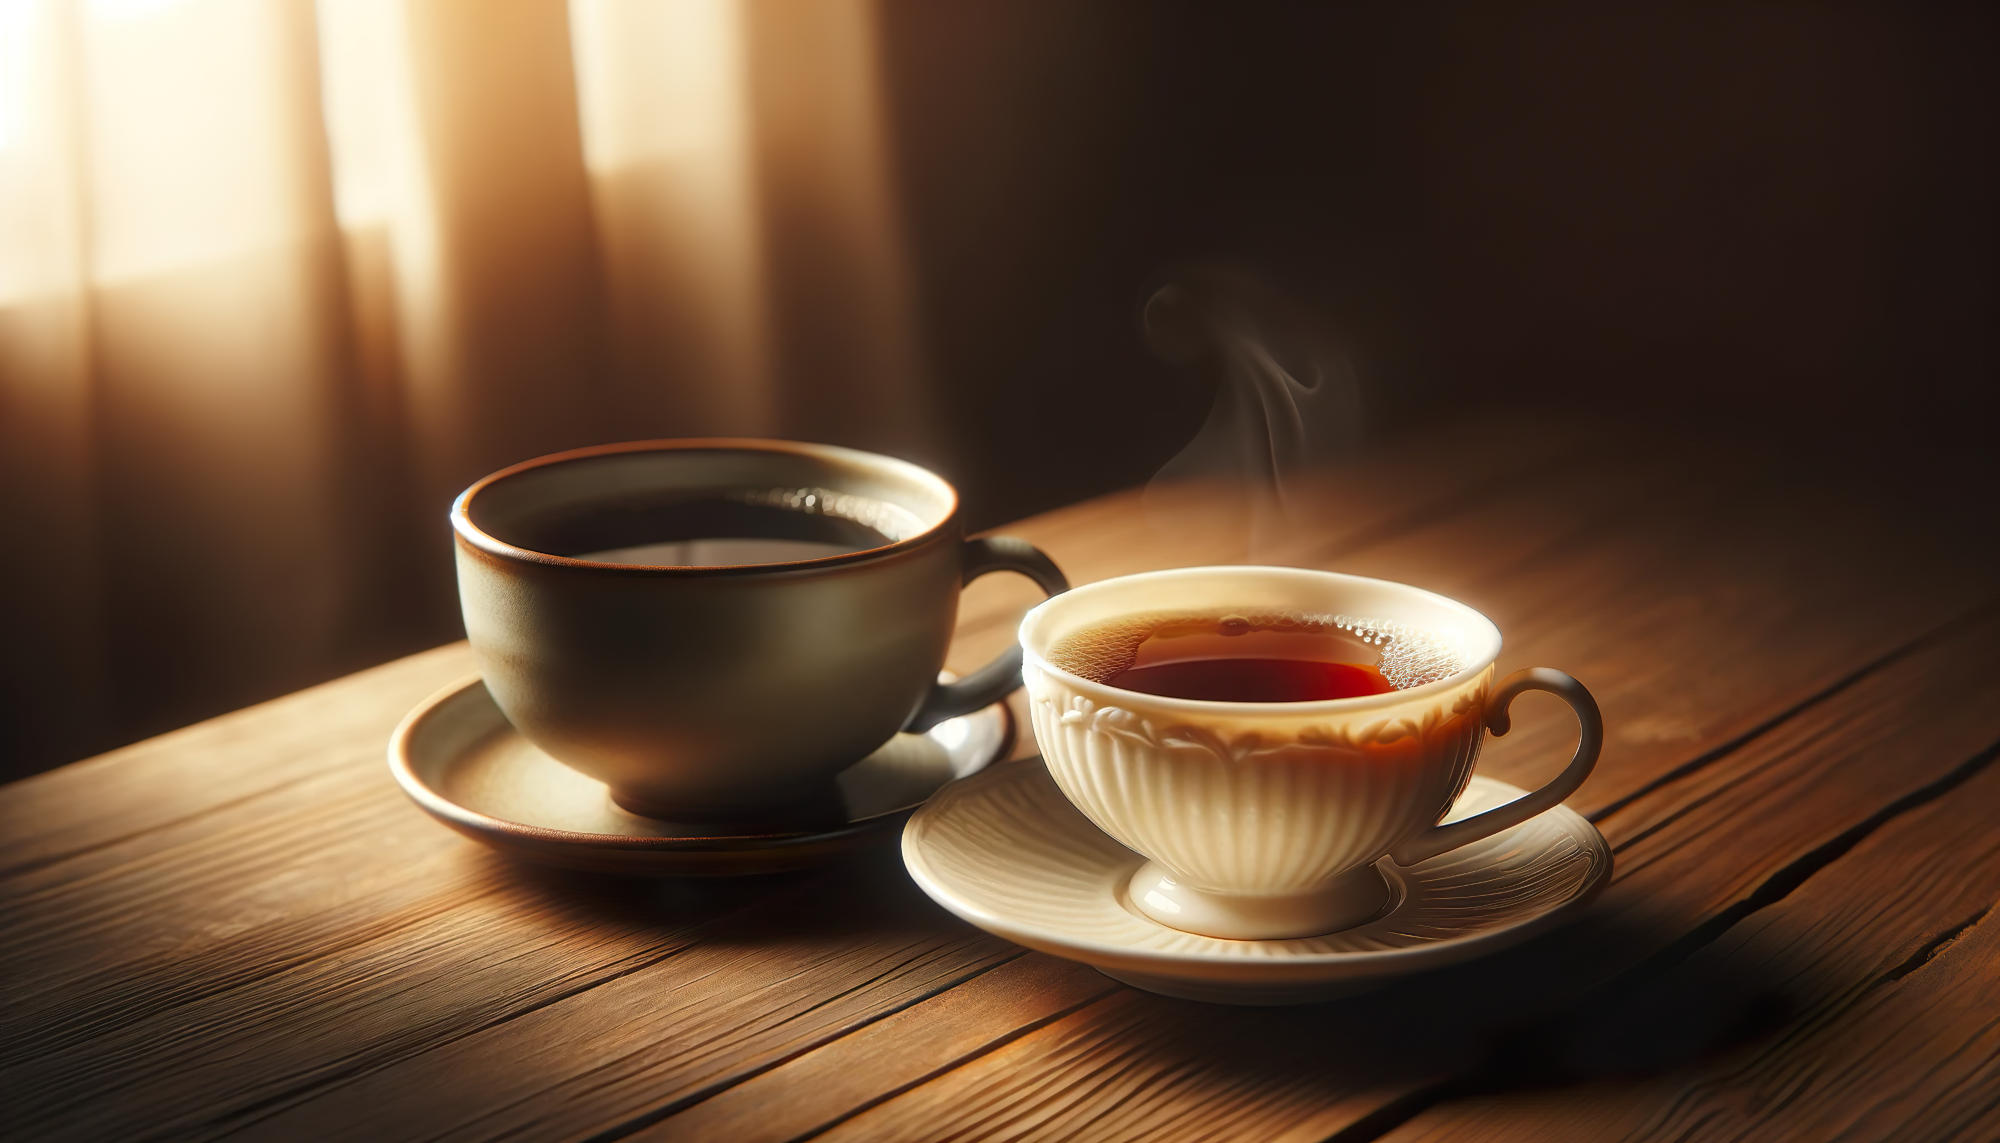 Improved Physical Function – Scientists Discover New Potential Health Benefit of Drinking Coffee or Tea